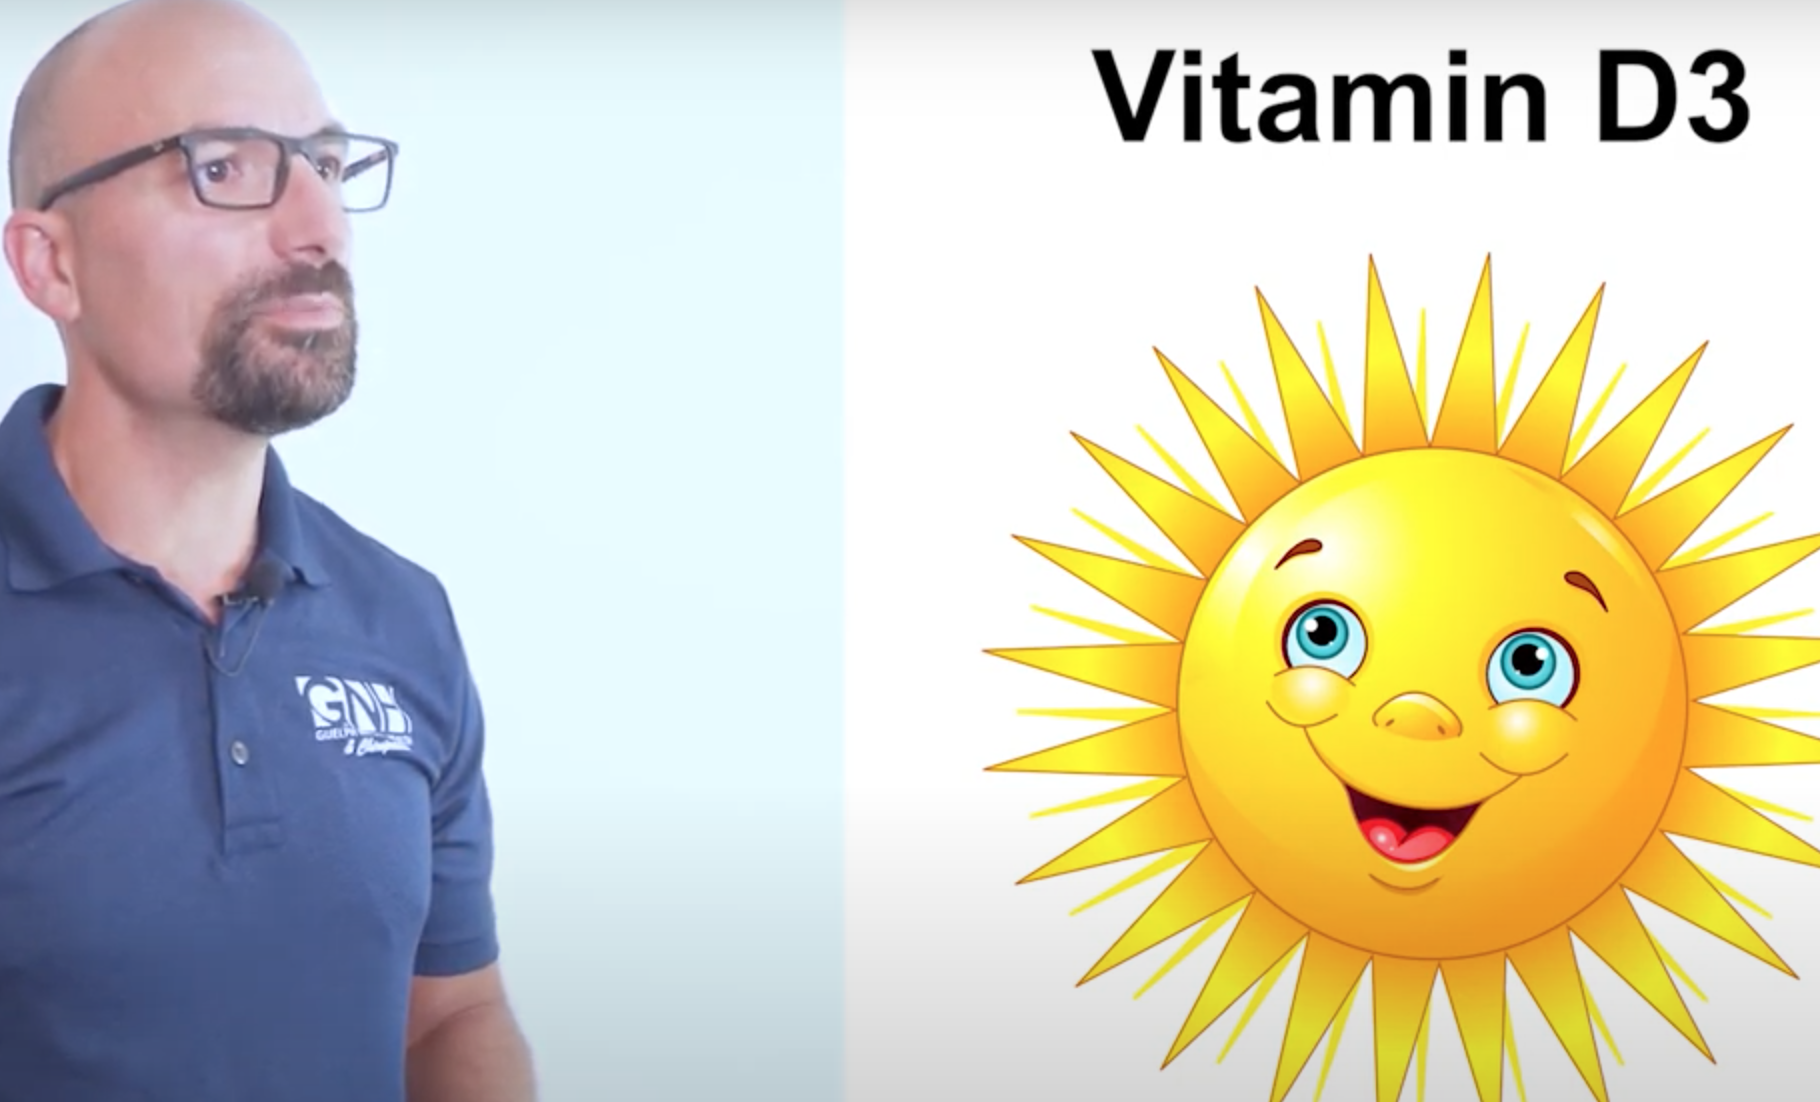 Link to Vitamin D3 video